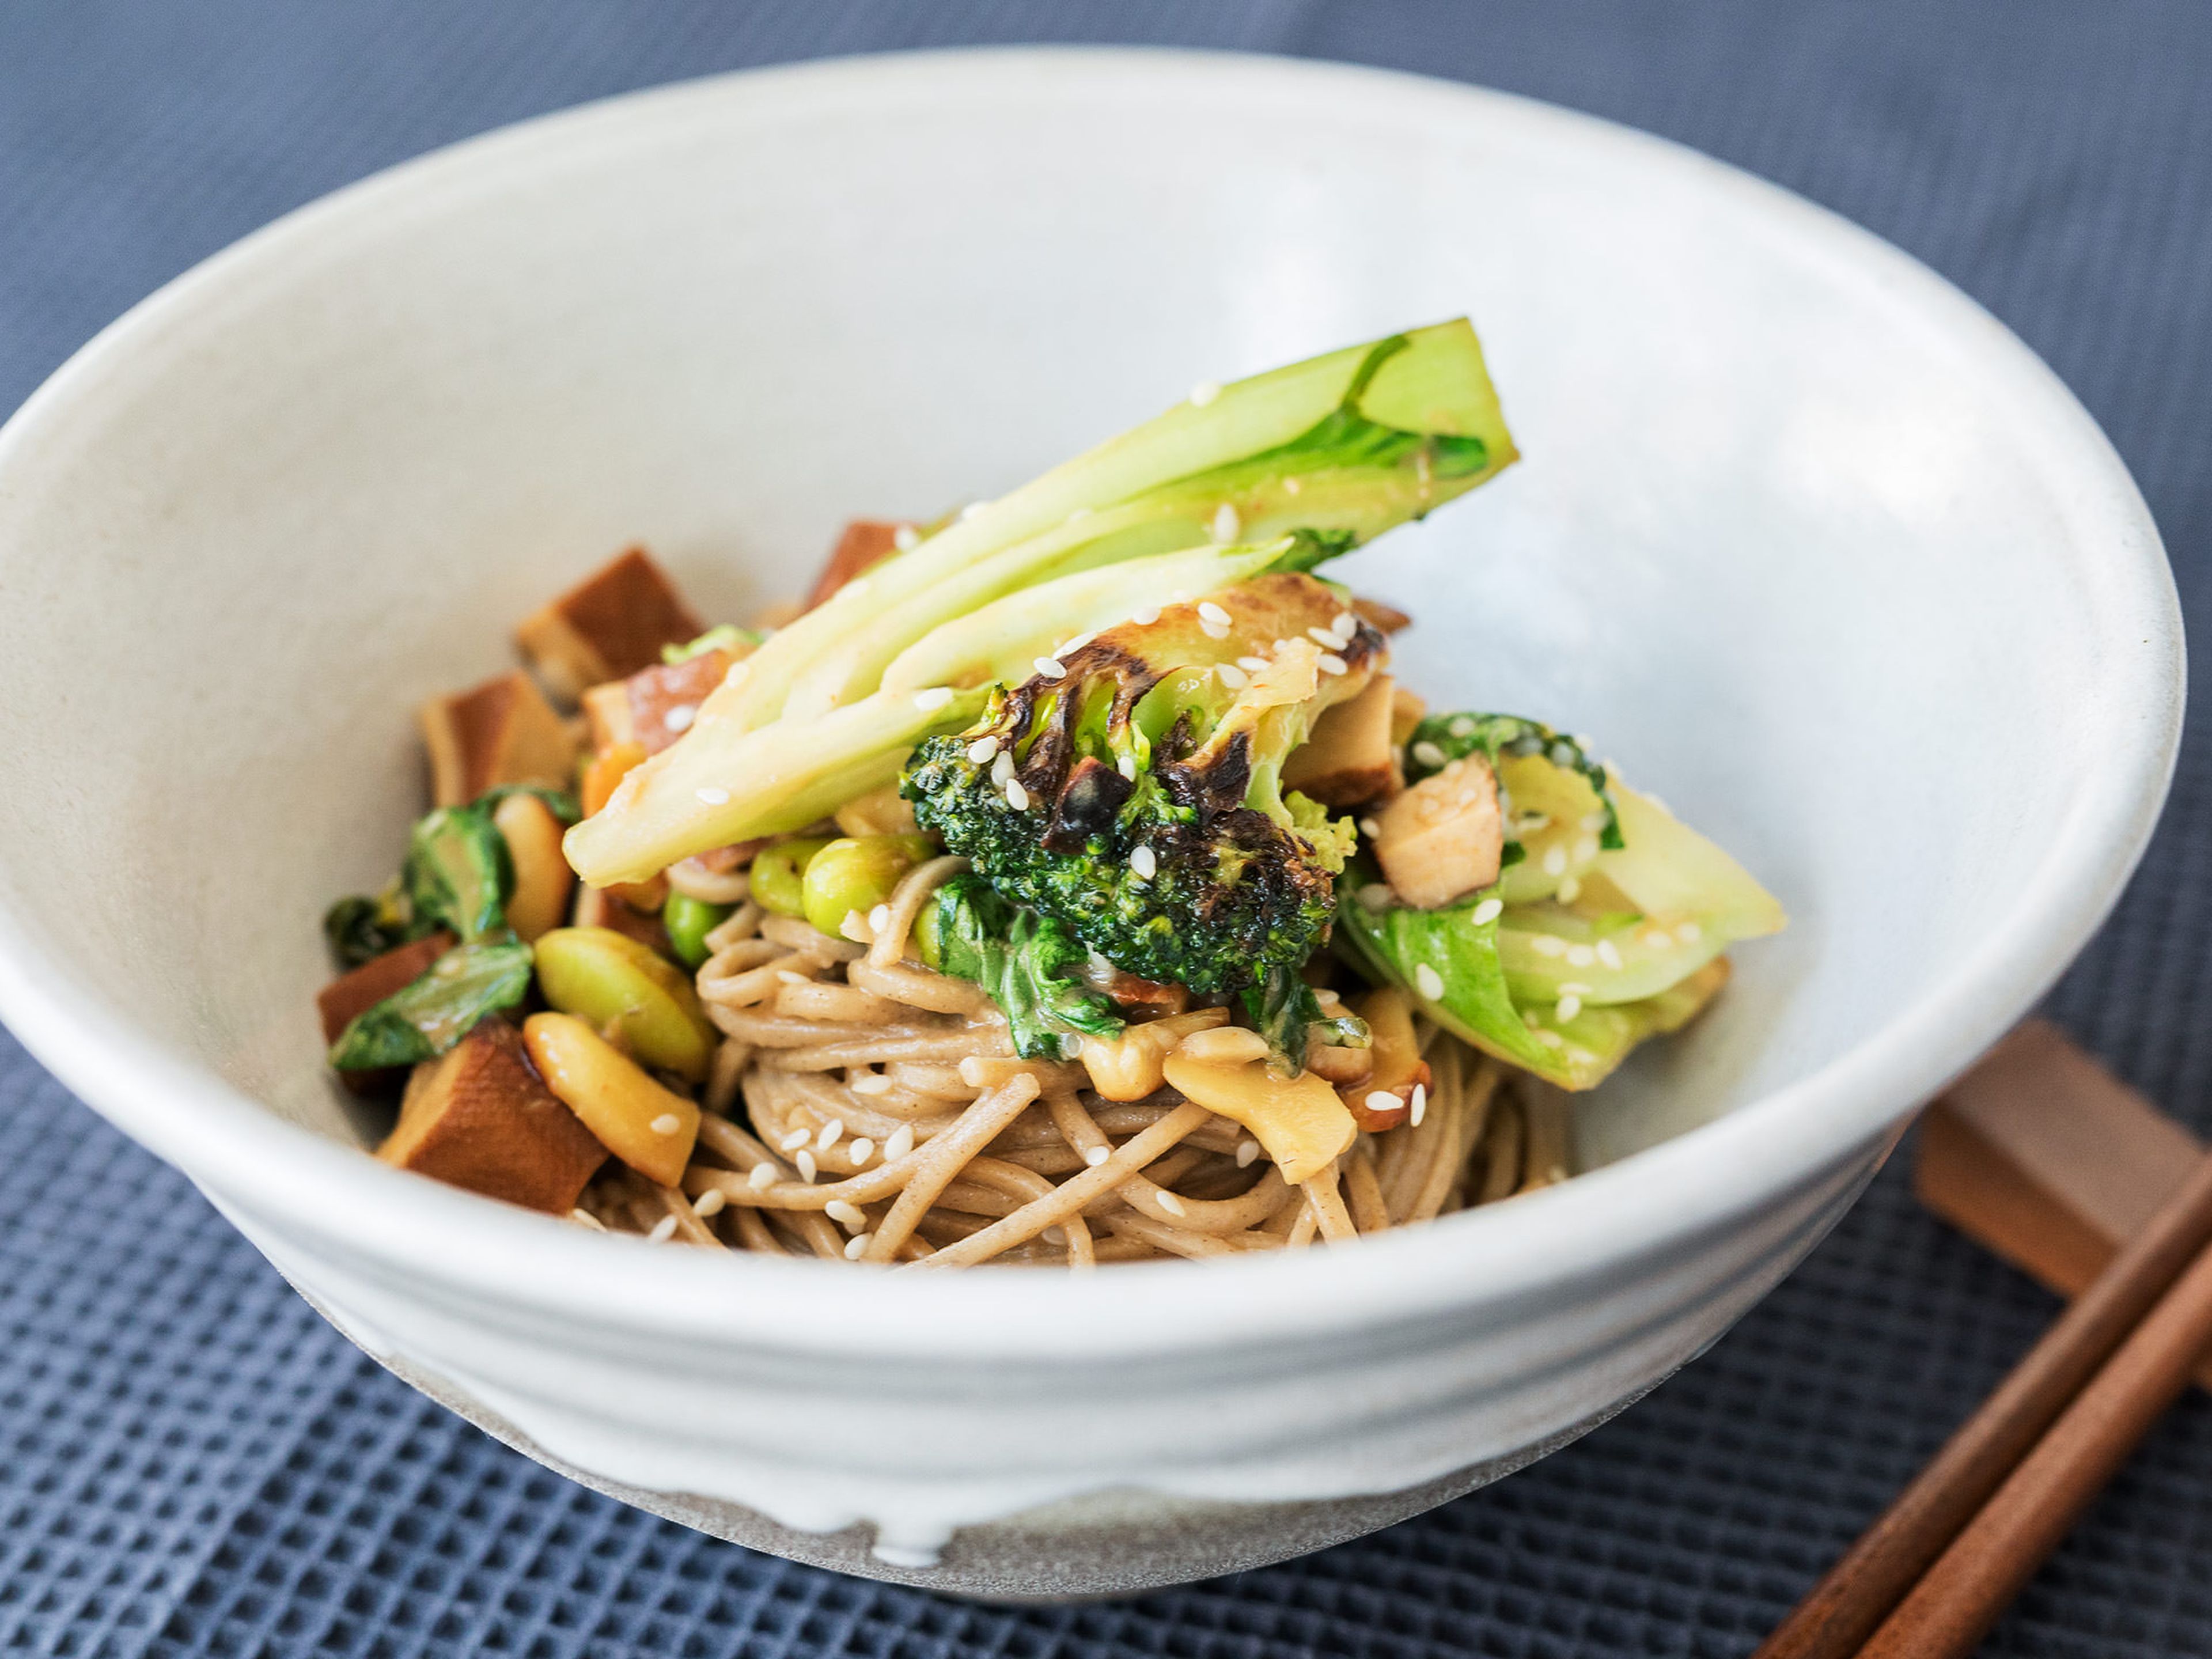 Soba noodles with miso-marinated tofu and vegetables